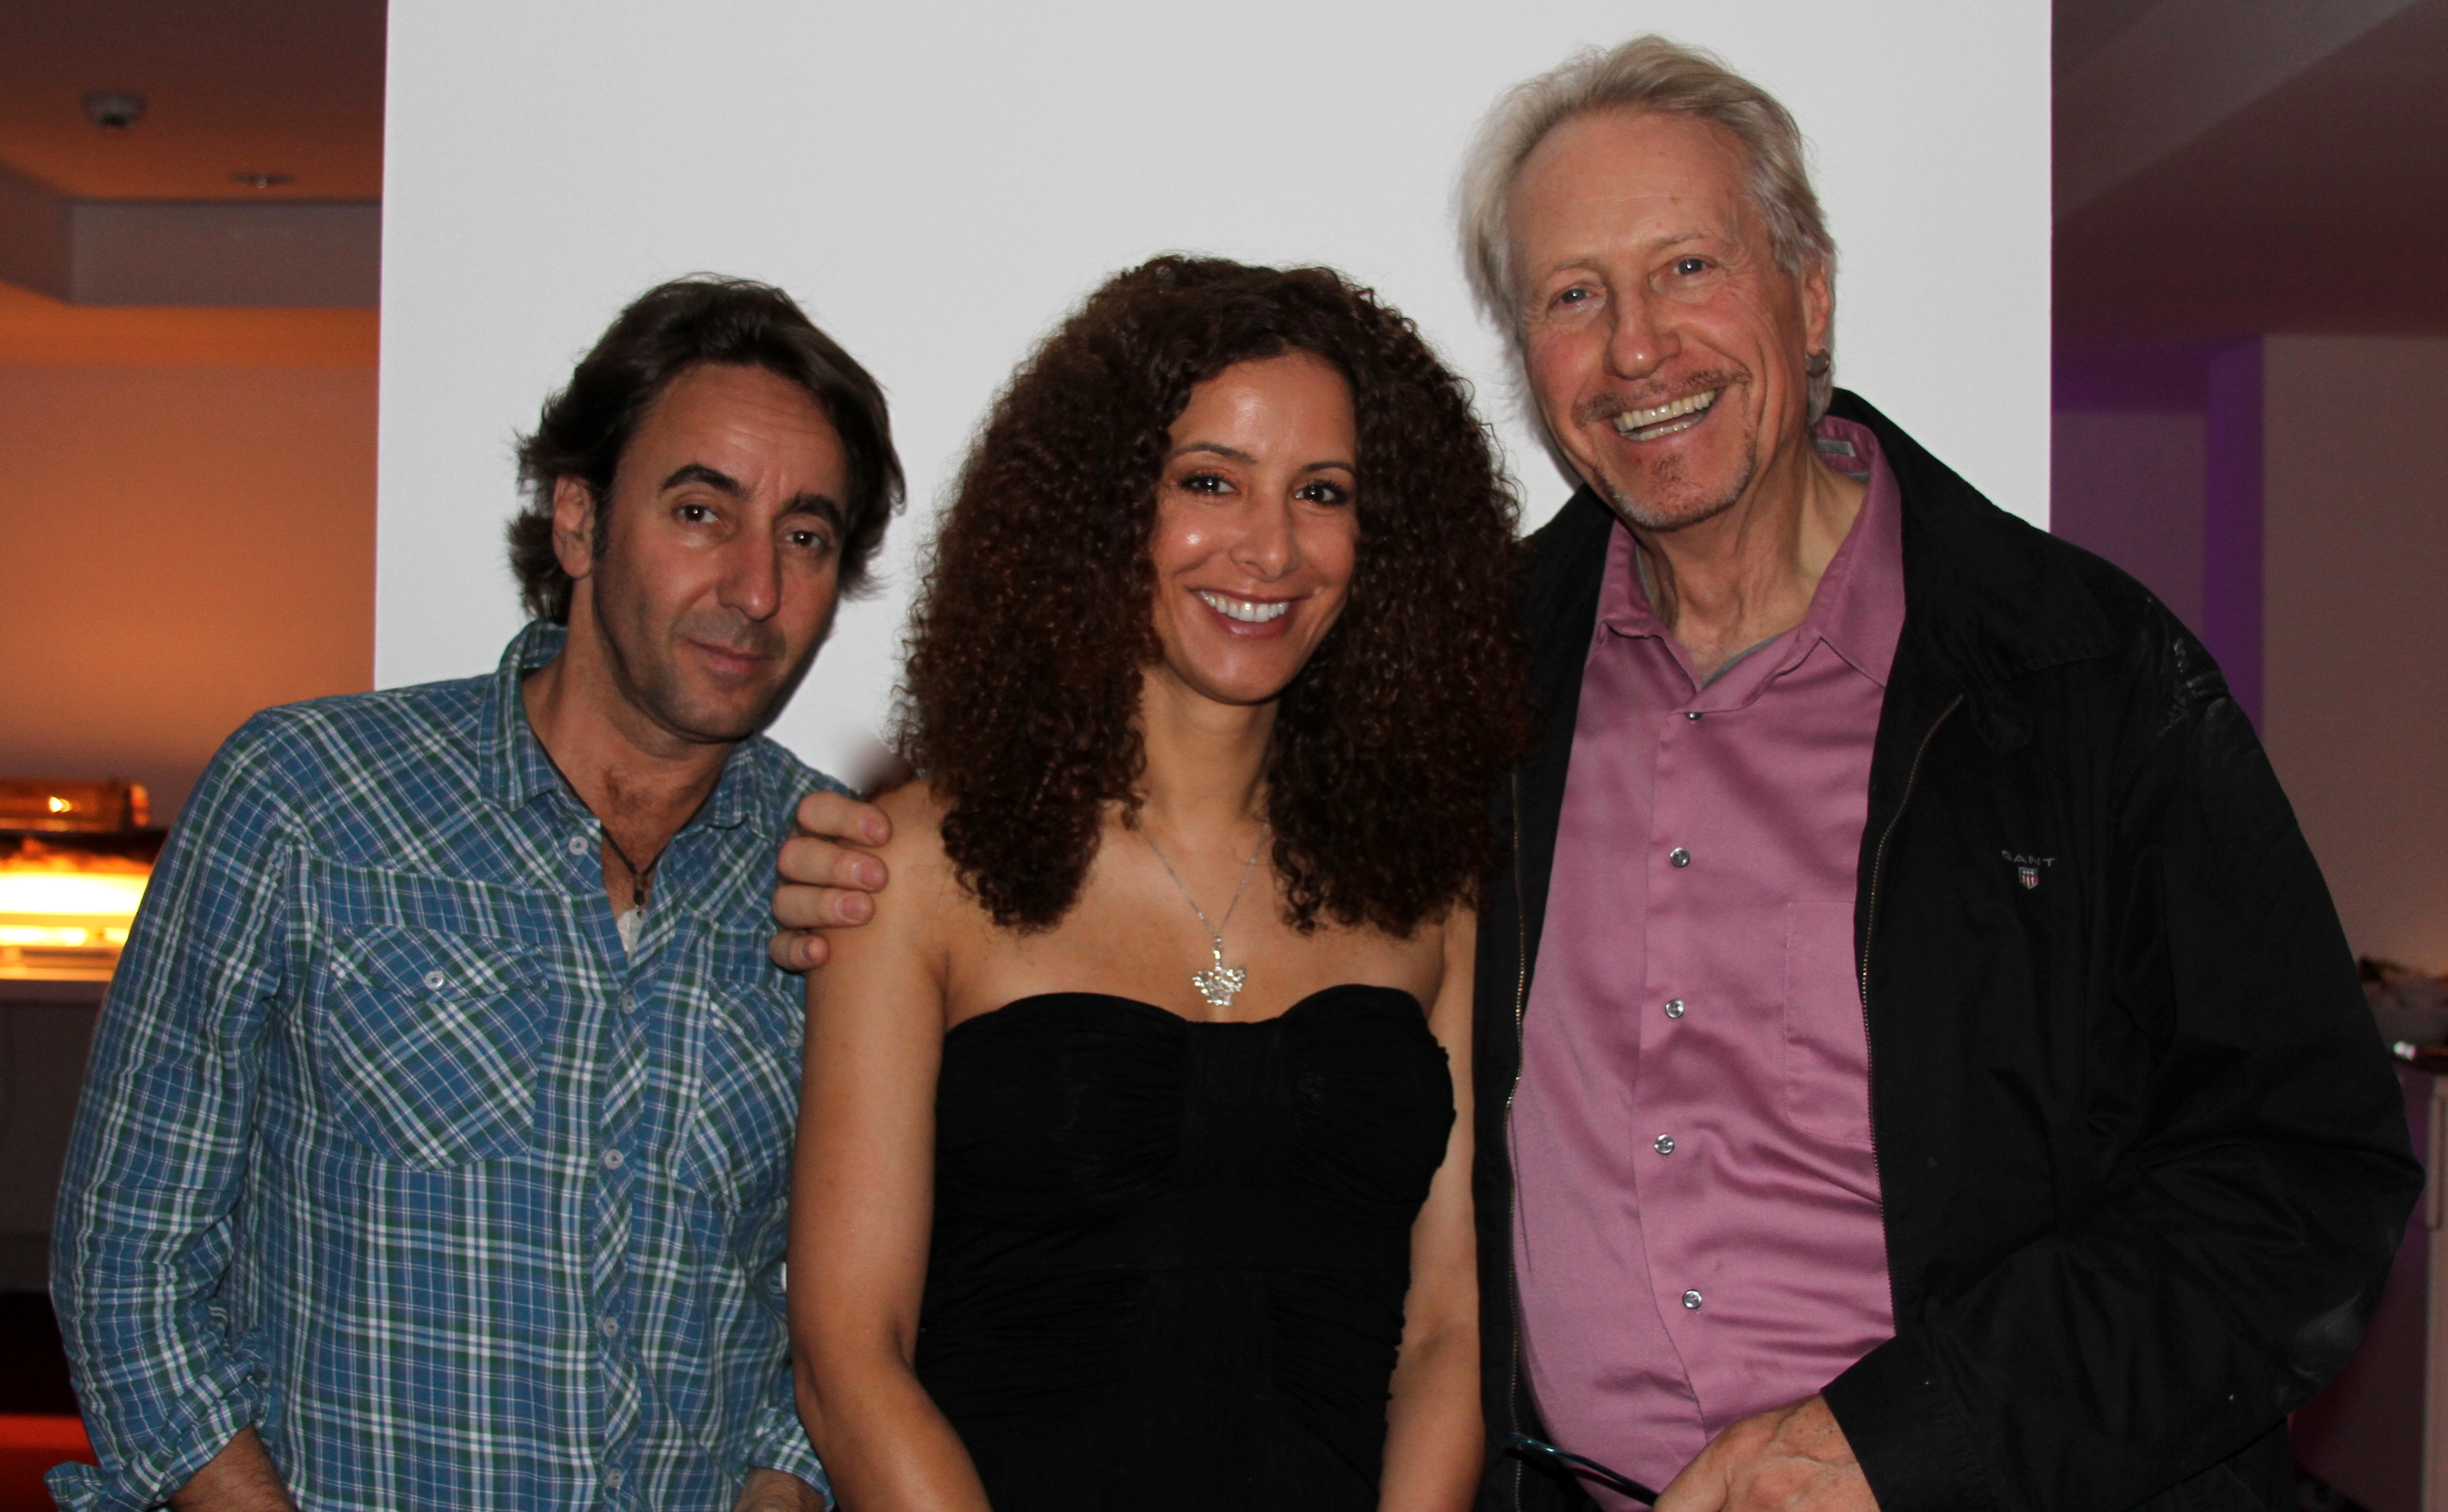 Dieter Landuris, Yvonne Maria Schaefer, Reiner Schone at the wrap party, for the Movie 